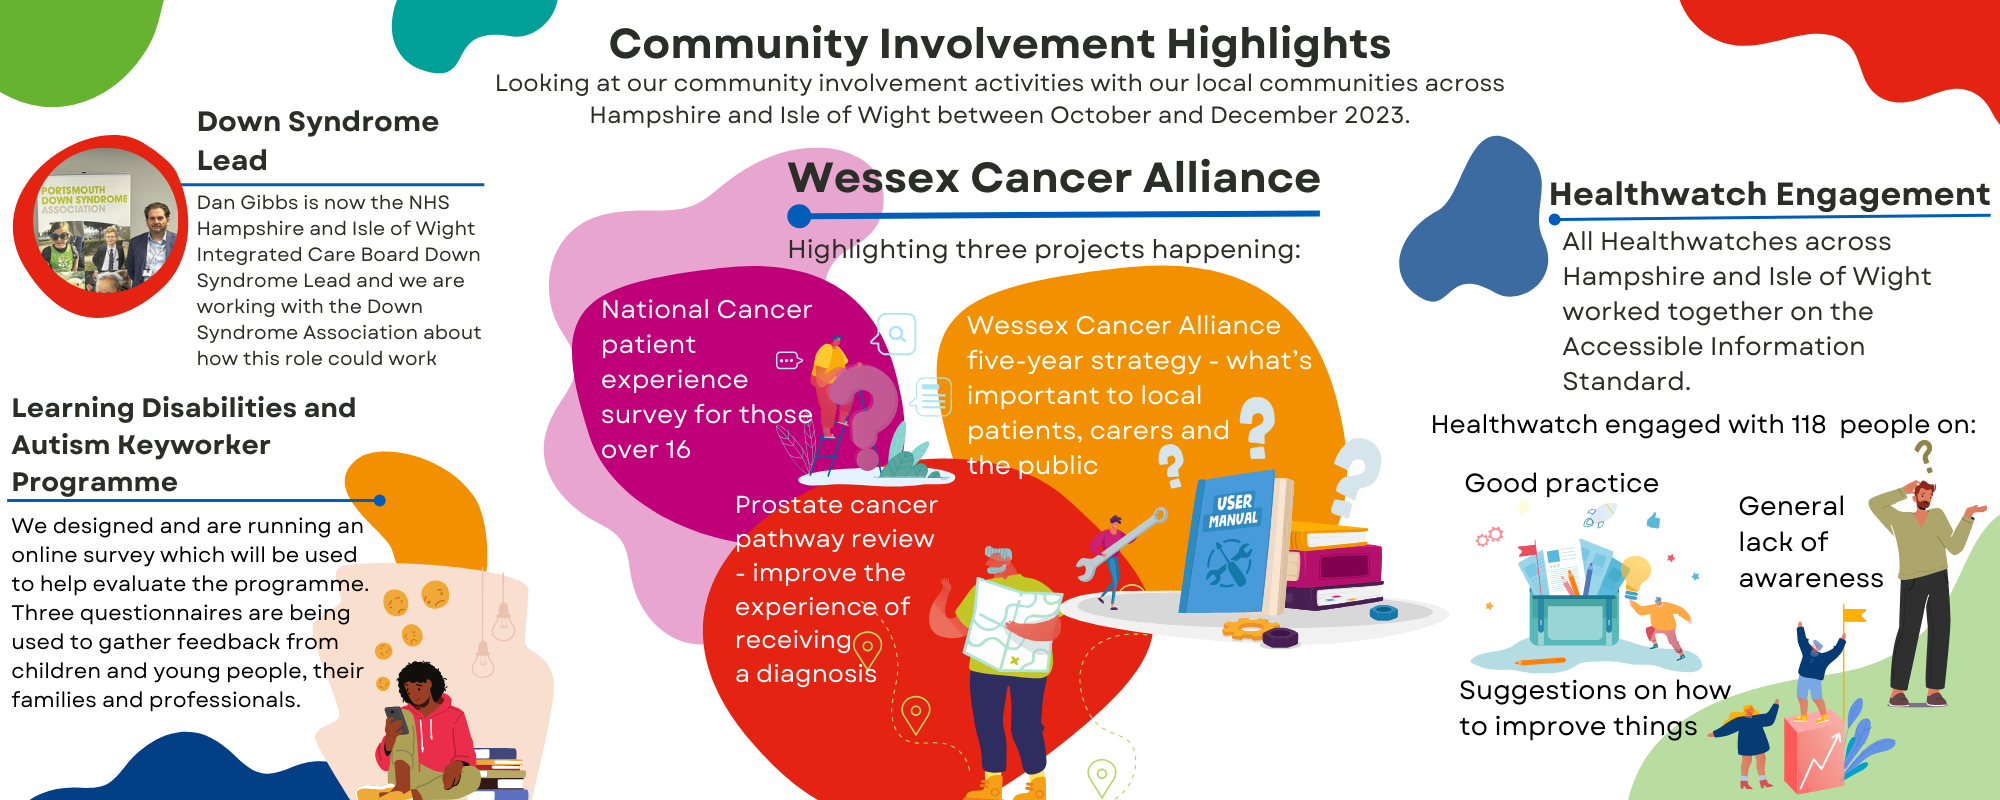 Community Involvement Highlights, Looking at our community involvement activities with our local communities across Hampshire and Isle of Wight between April and June 2023.  Please download version at the bottom of the page. 